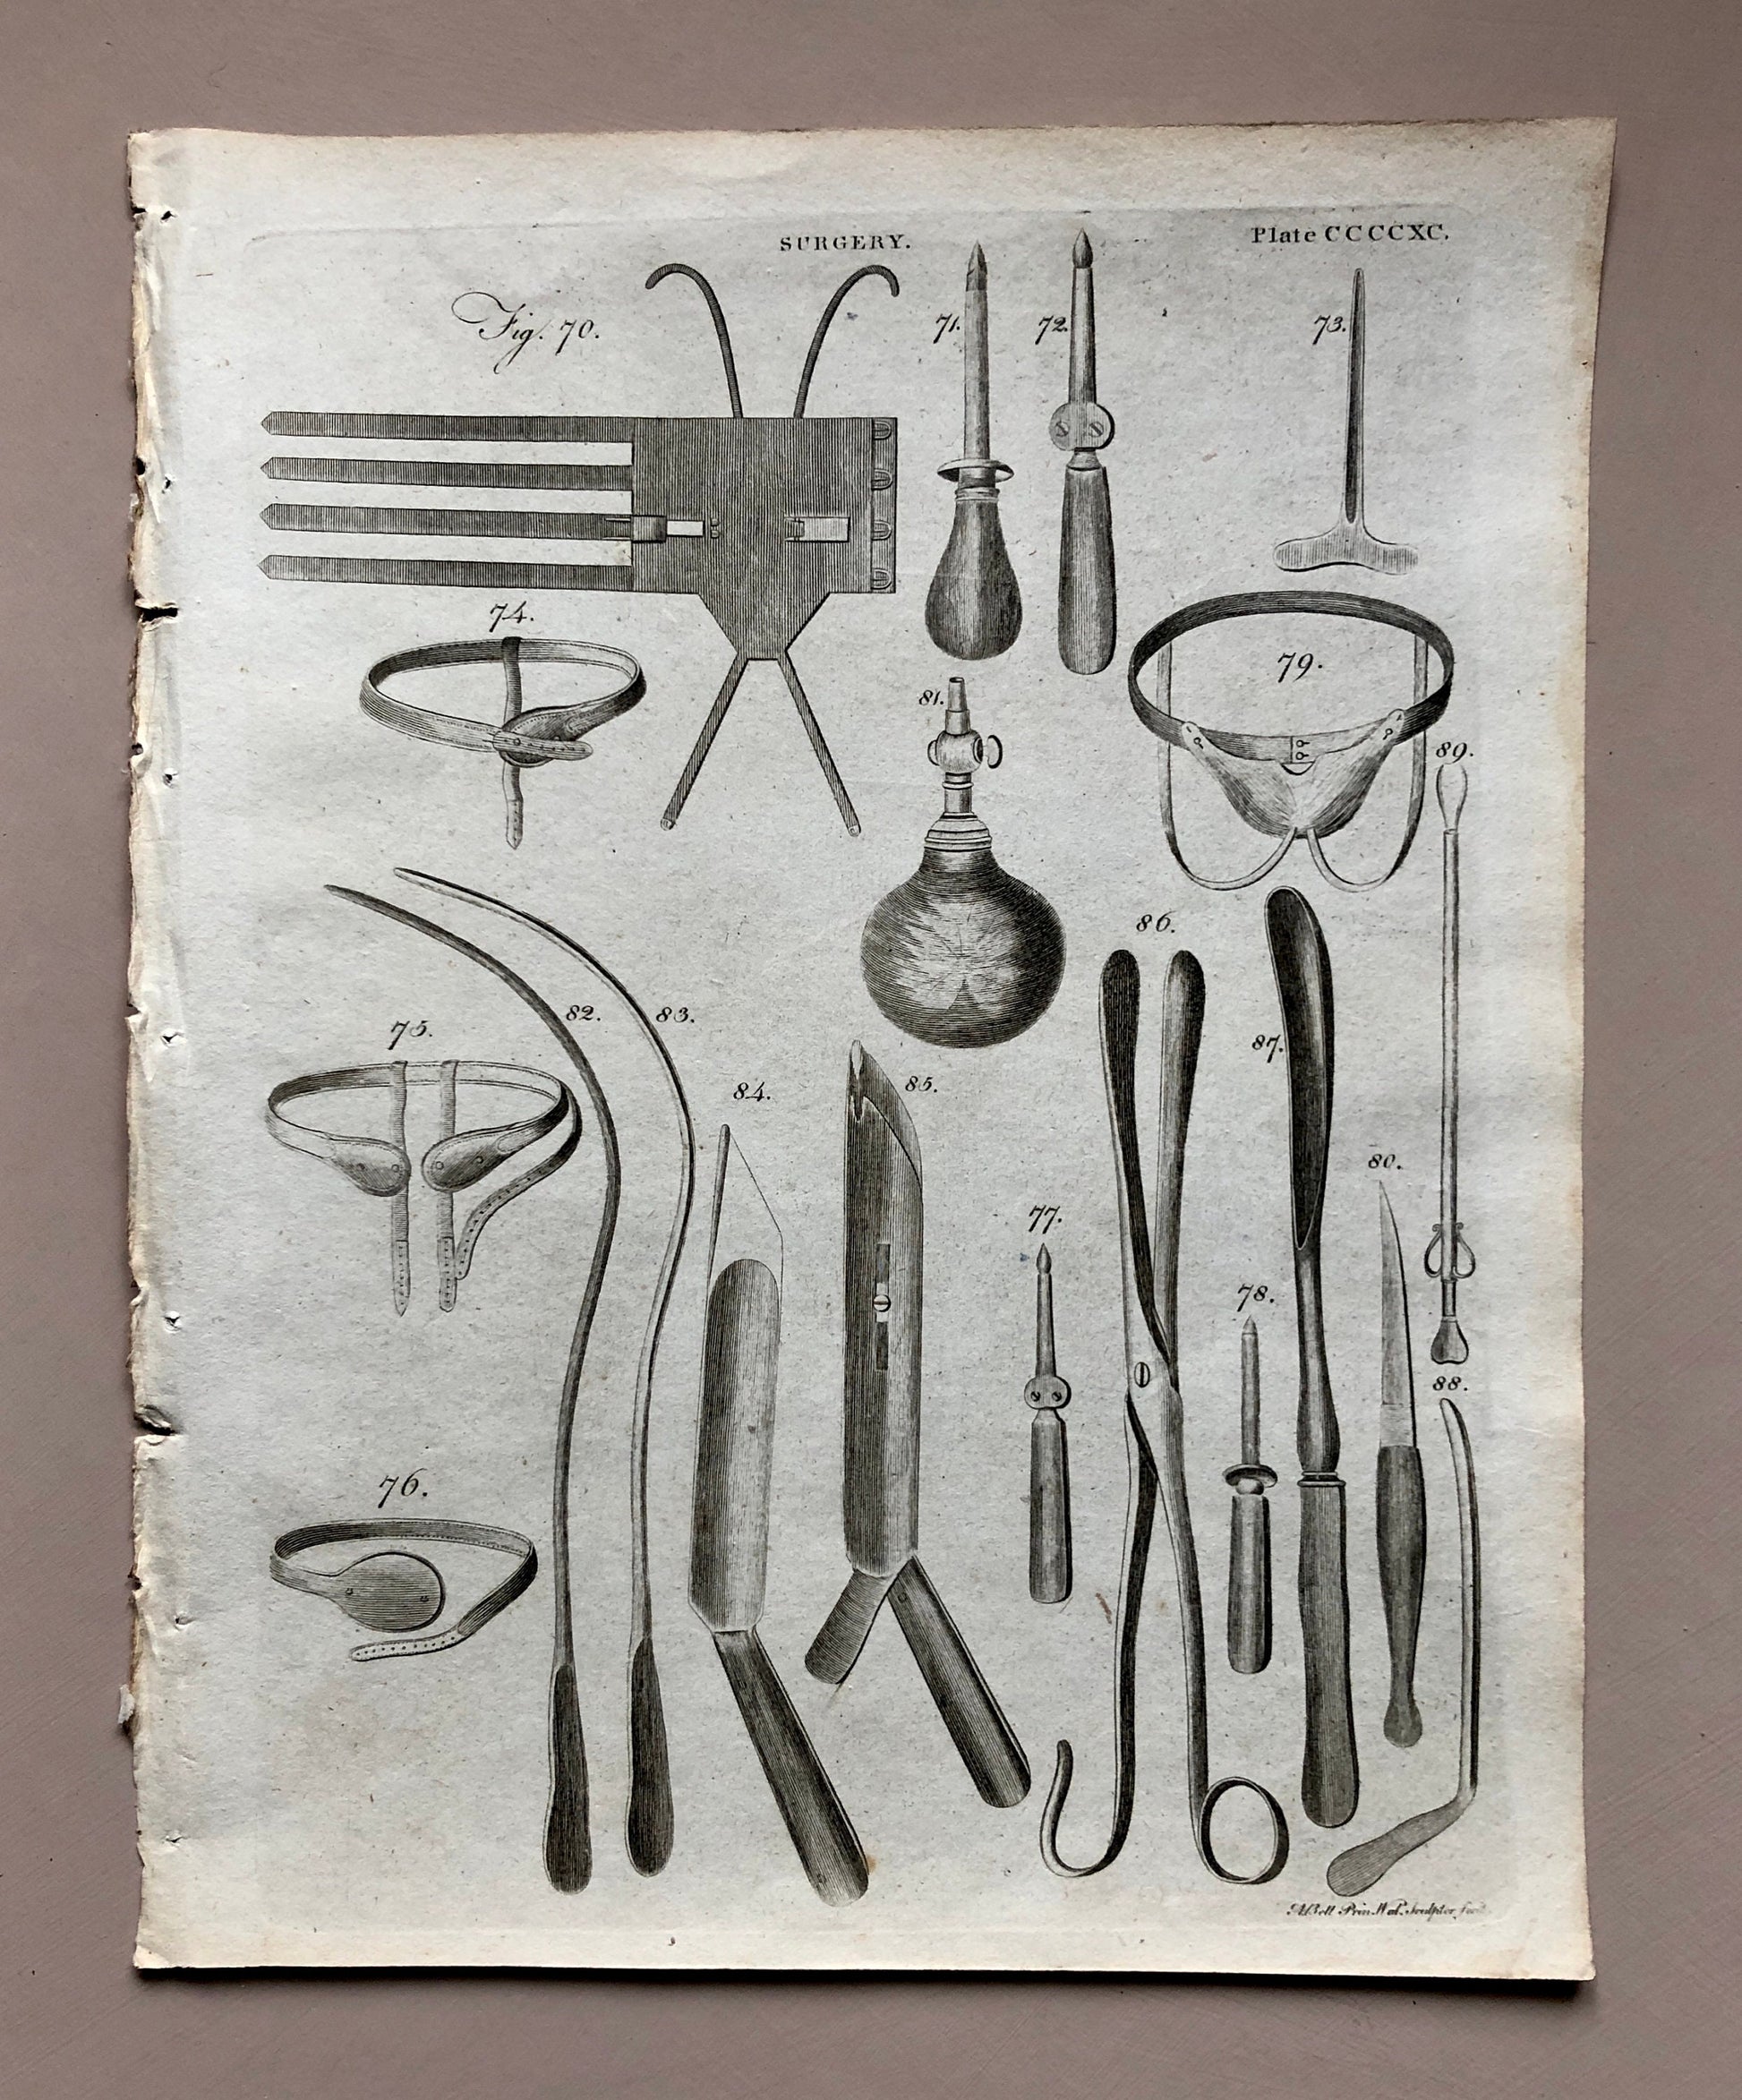 Surgery. 6 Original Engravings of Surgical Equiptment From The Encyclopedia Britannica, 1797. Engraved by A. Bell. Size: 26.5 x 20.5 cms